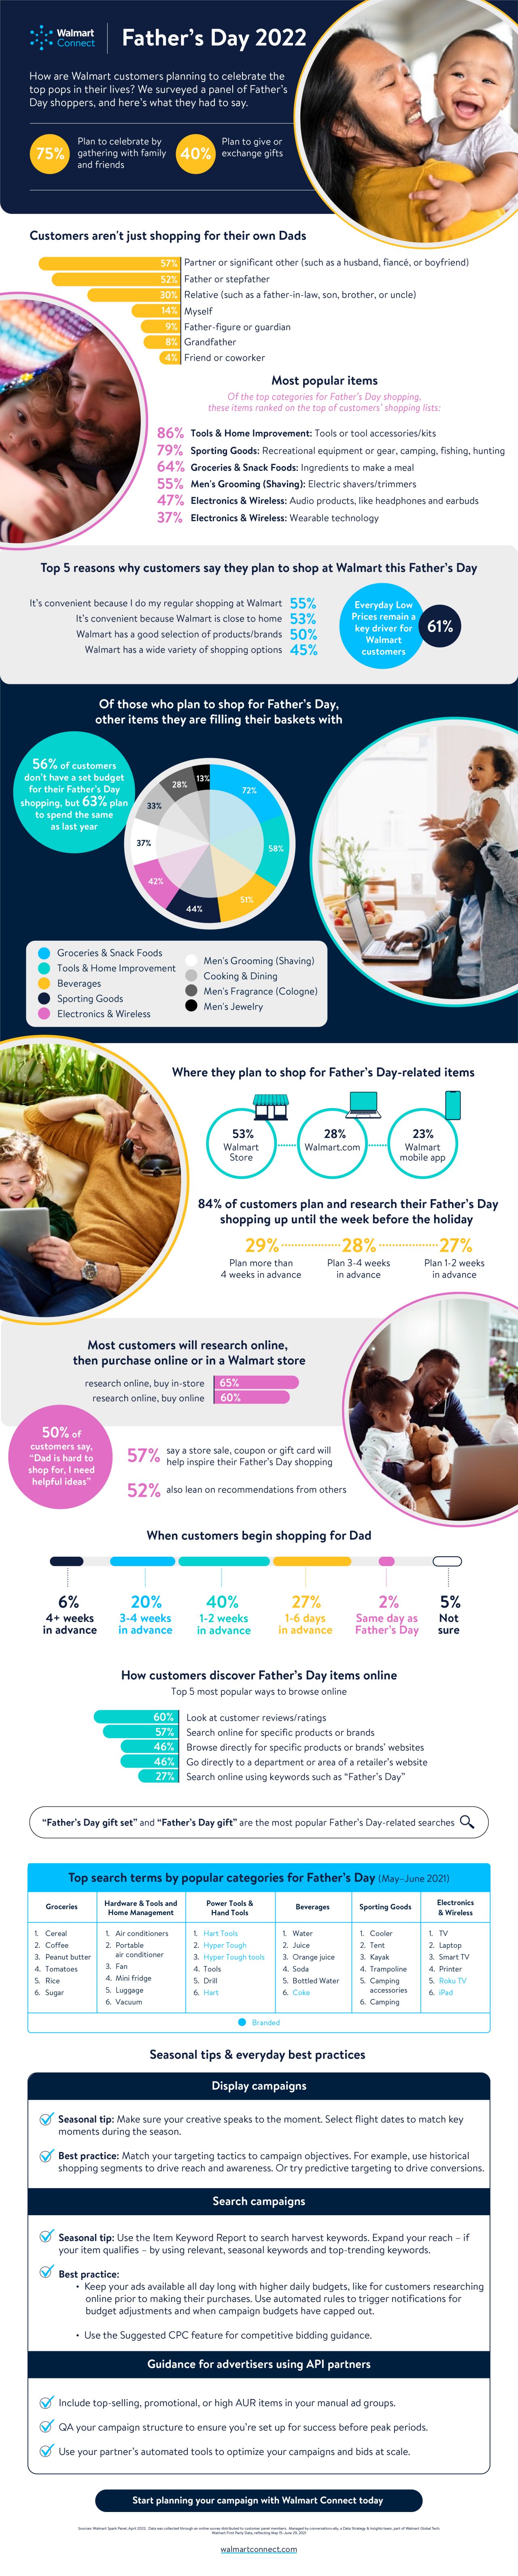 Father's Day 2022 Infographic